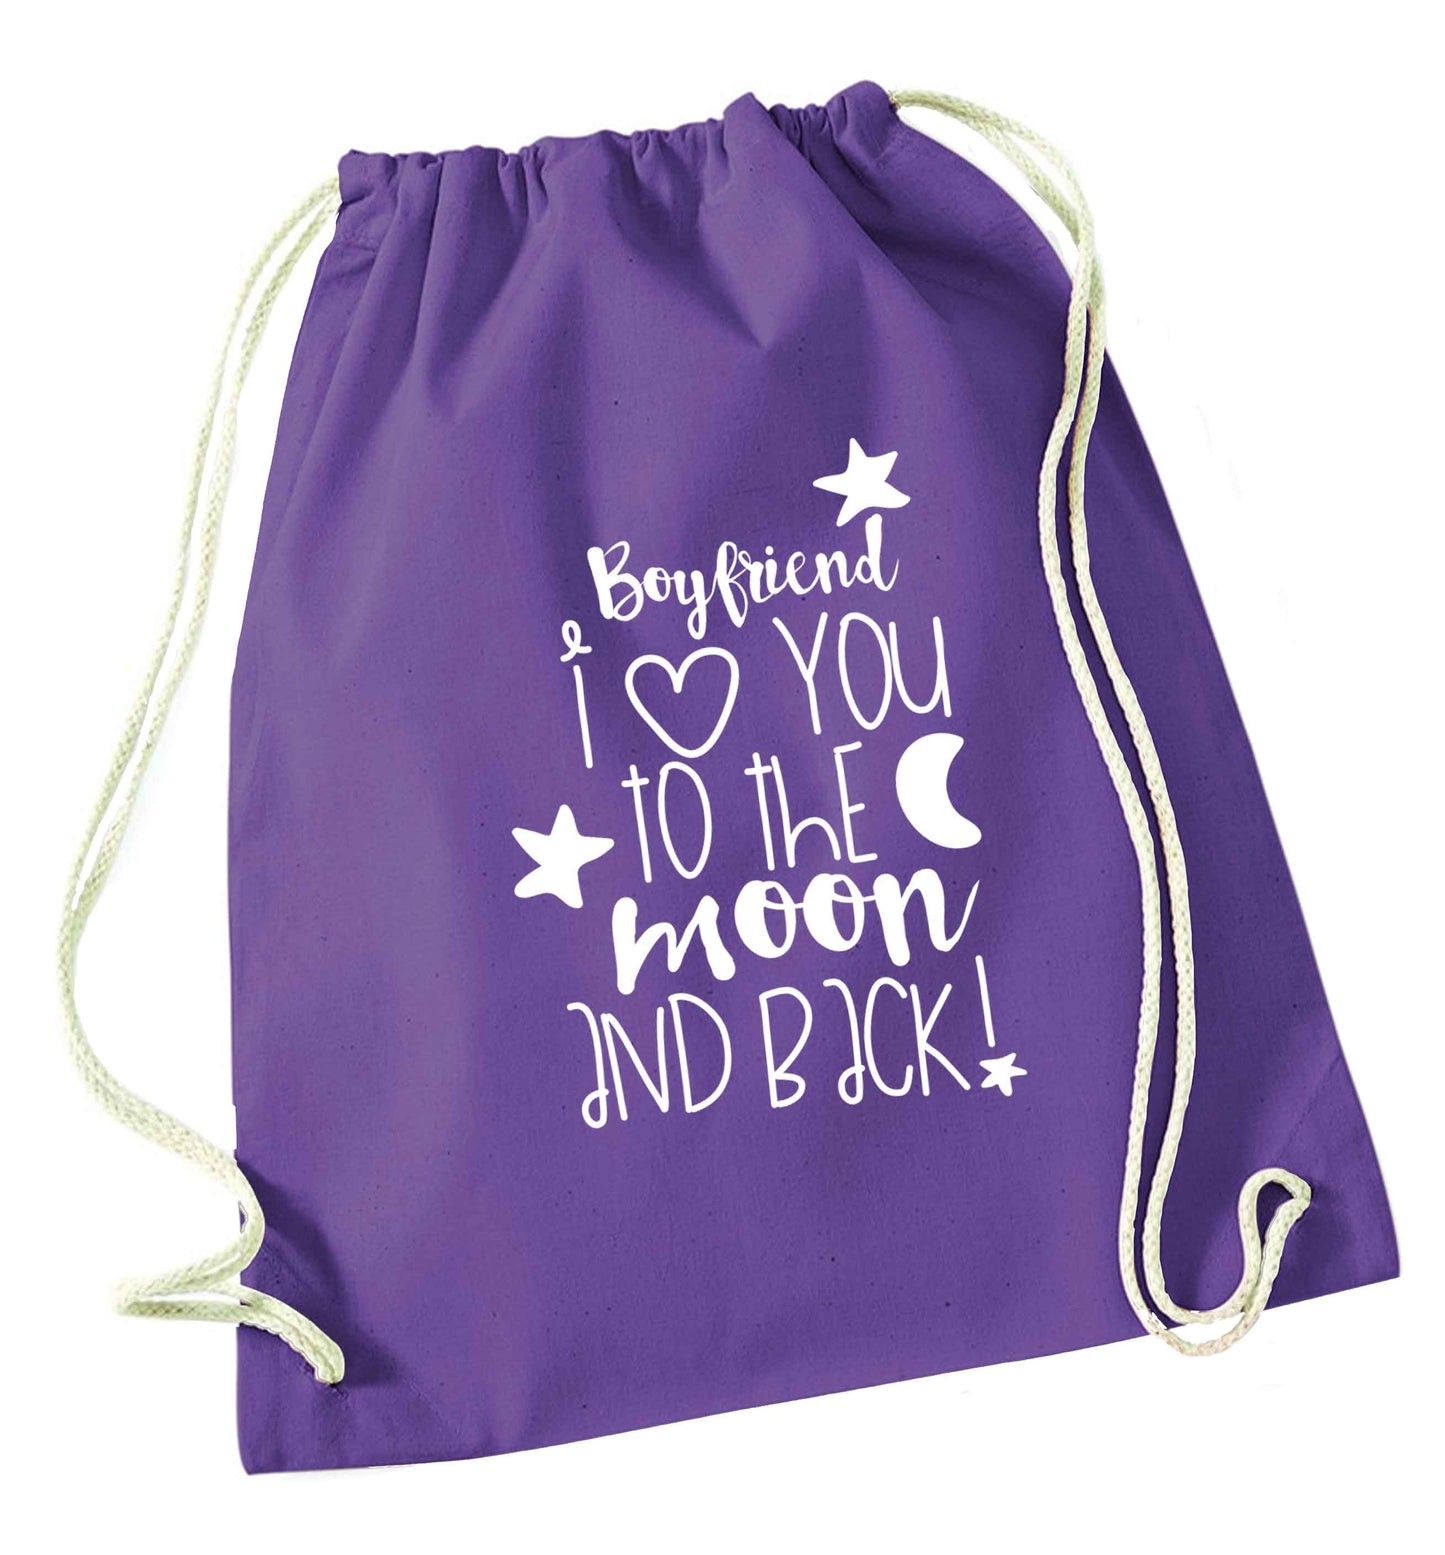 Boyfriend I love you to the moon and back purple drawstring bag